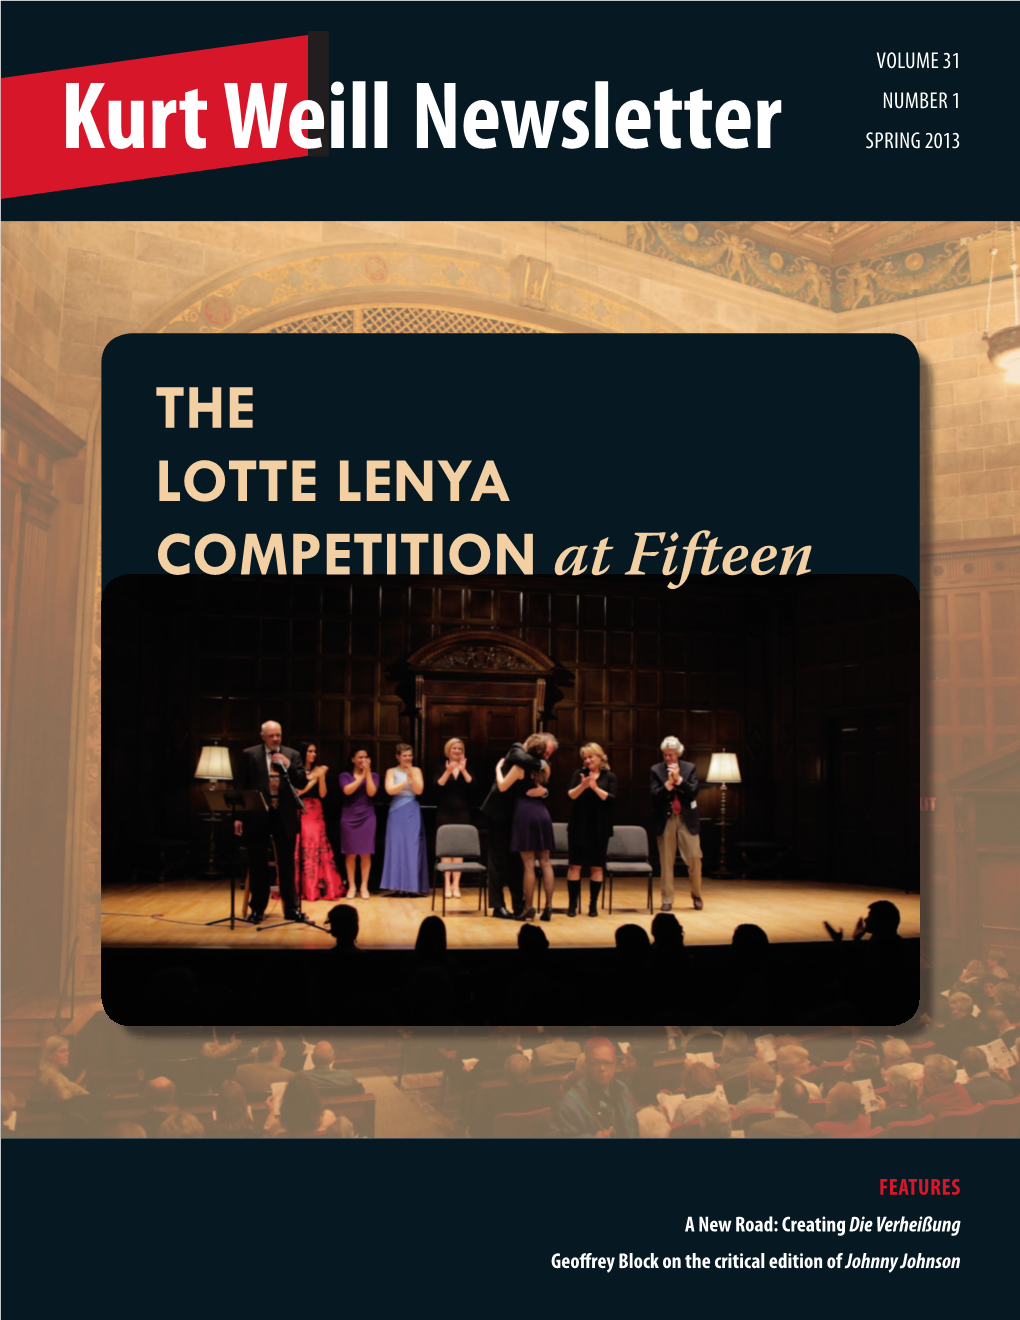 THE LOTTE LENYA COMPETITION at Fifteen